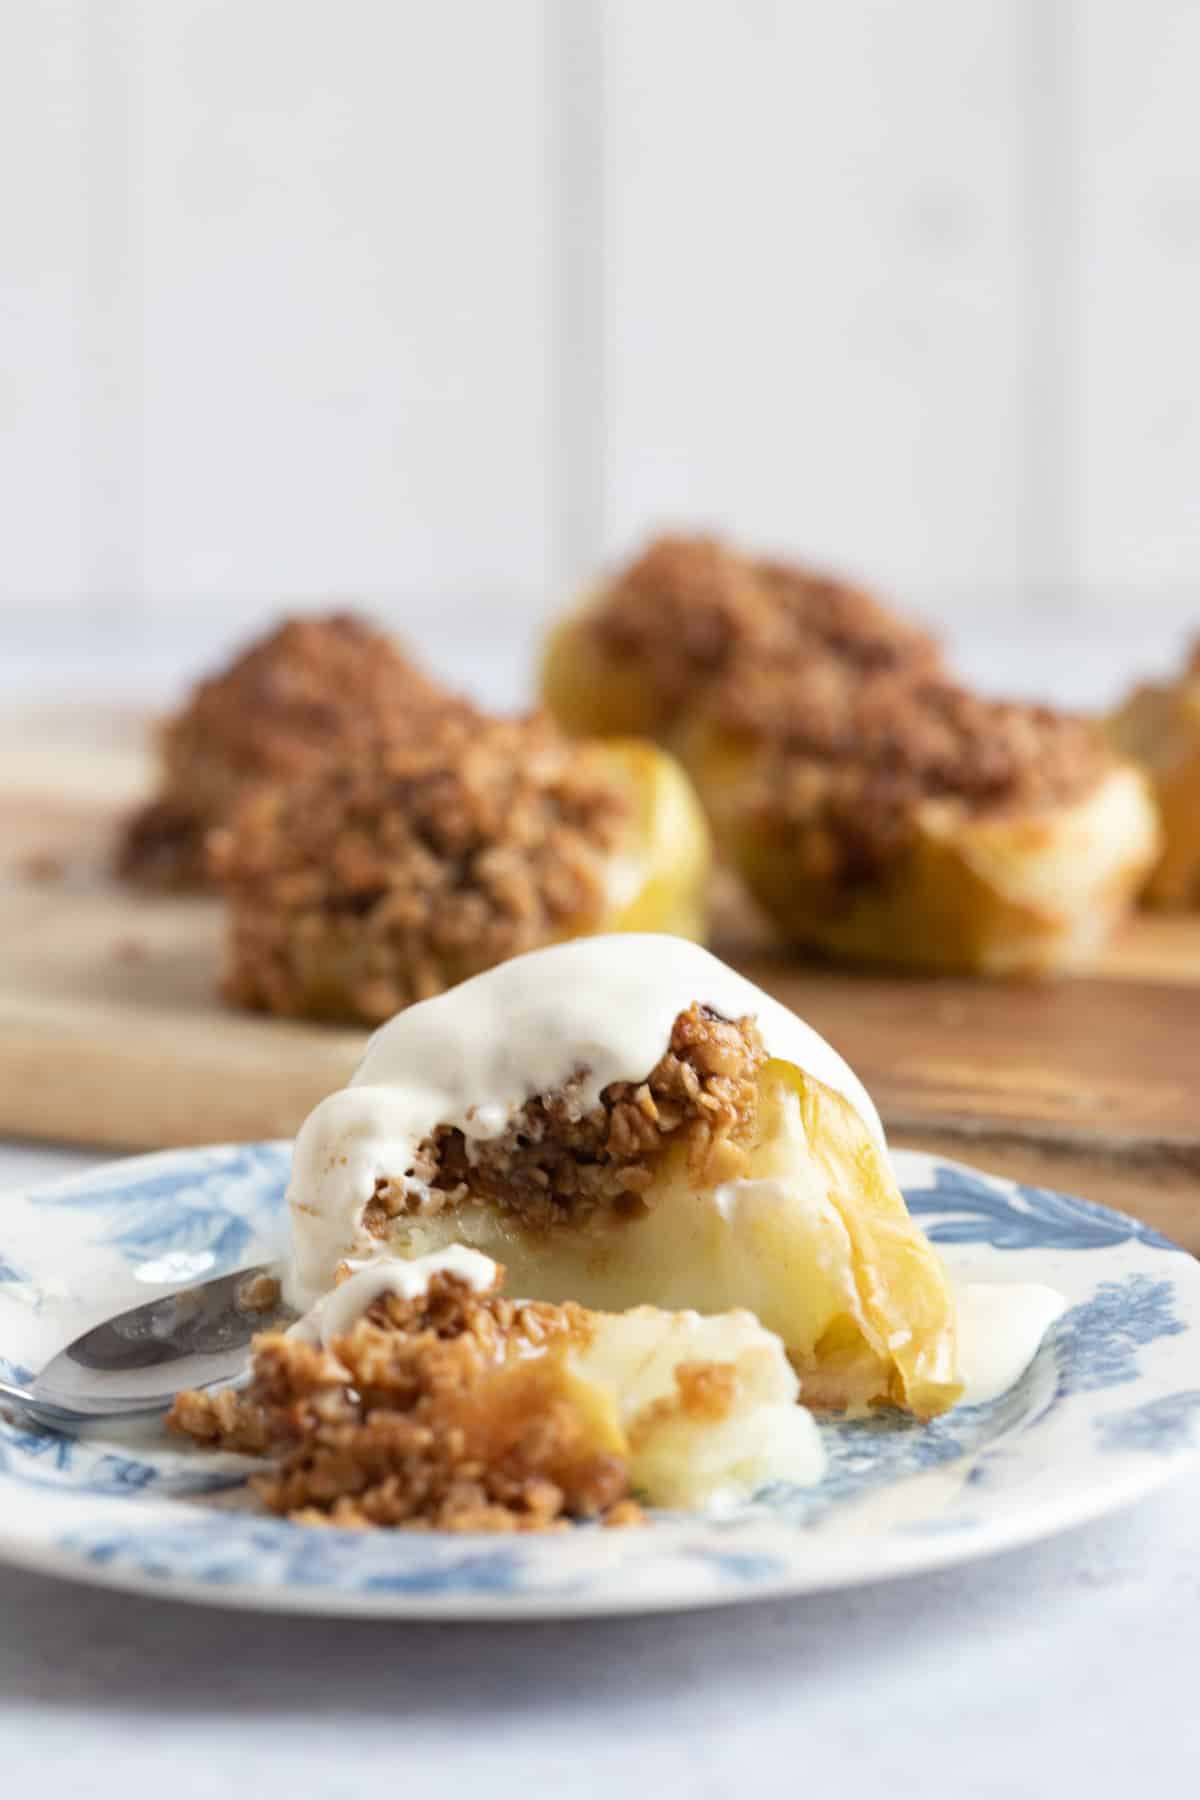 Baked apple on a plate with a crumble topping.